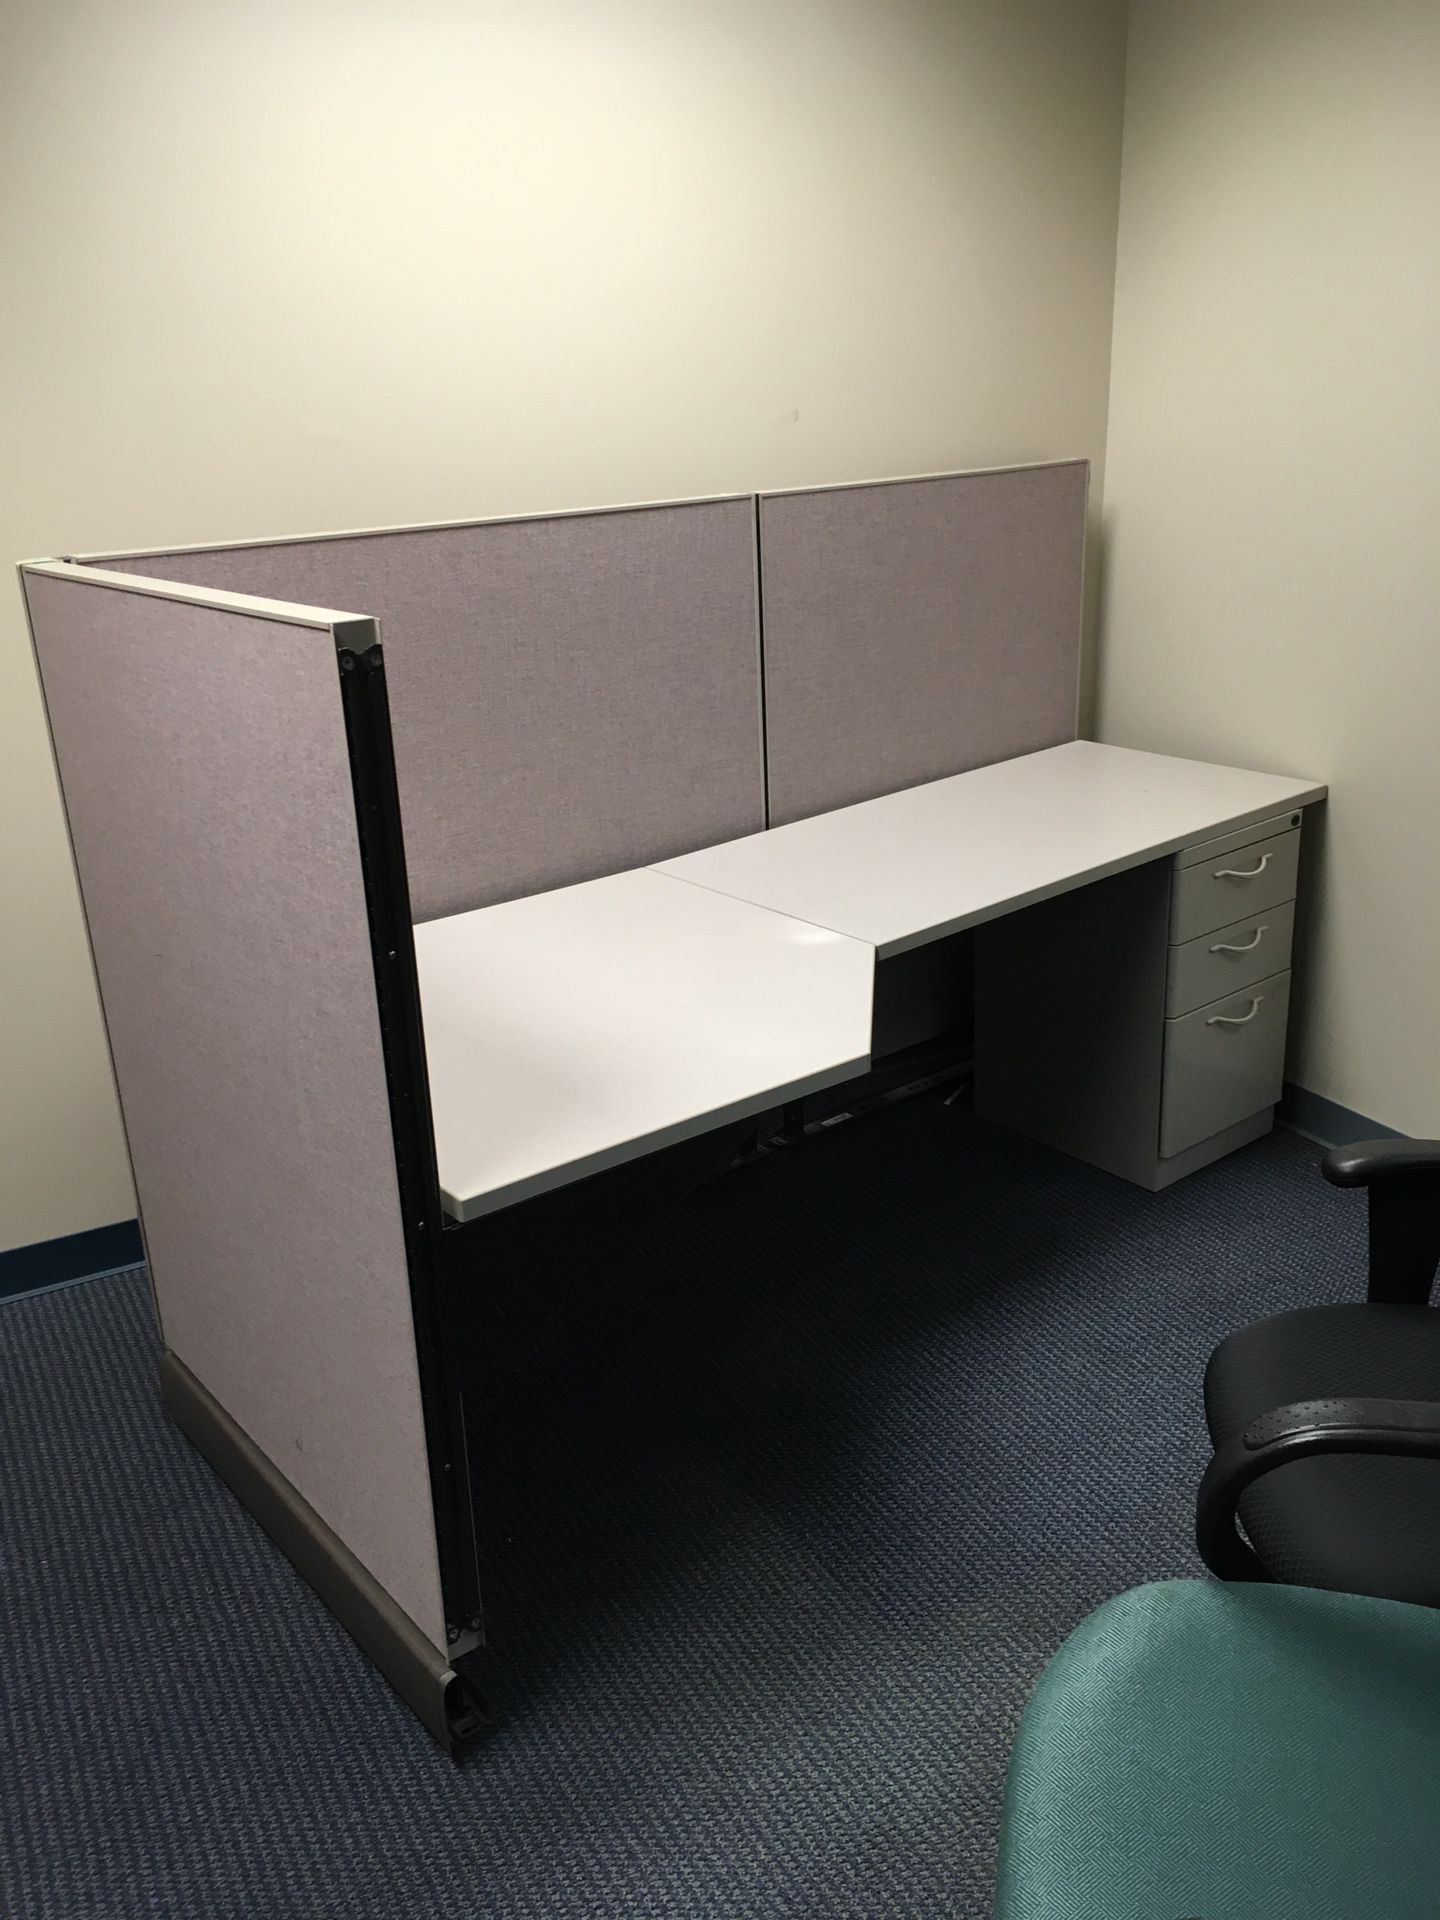 Free Cubicles - Pick up in Norcross